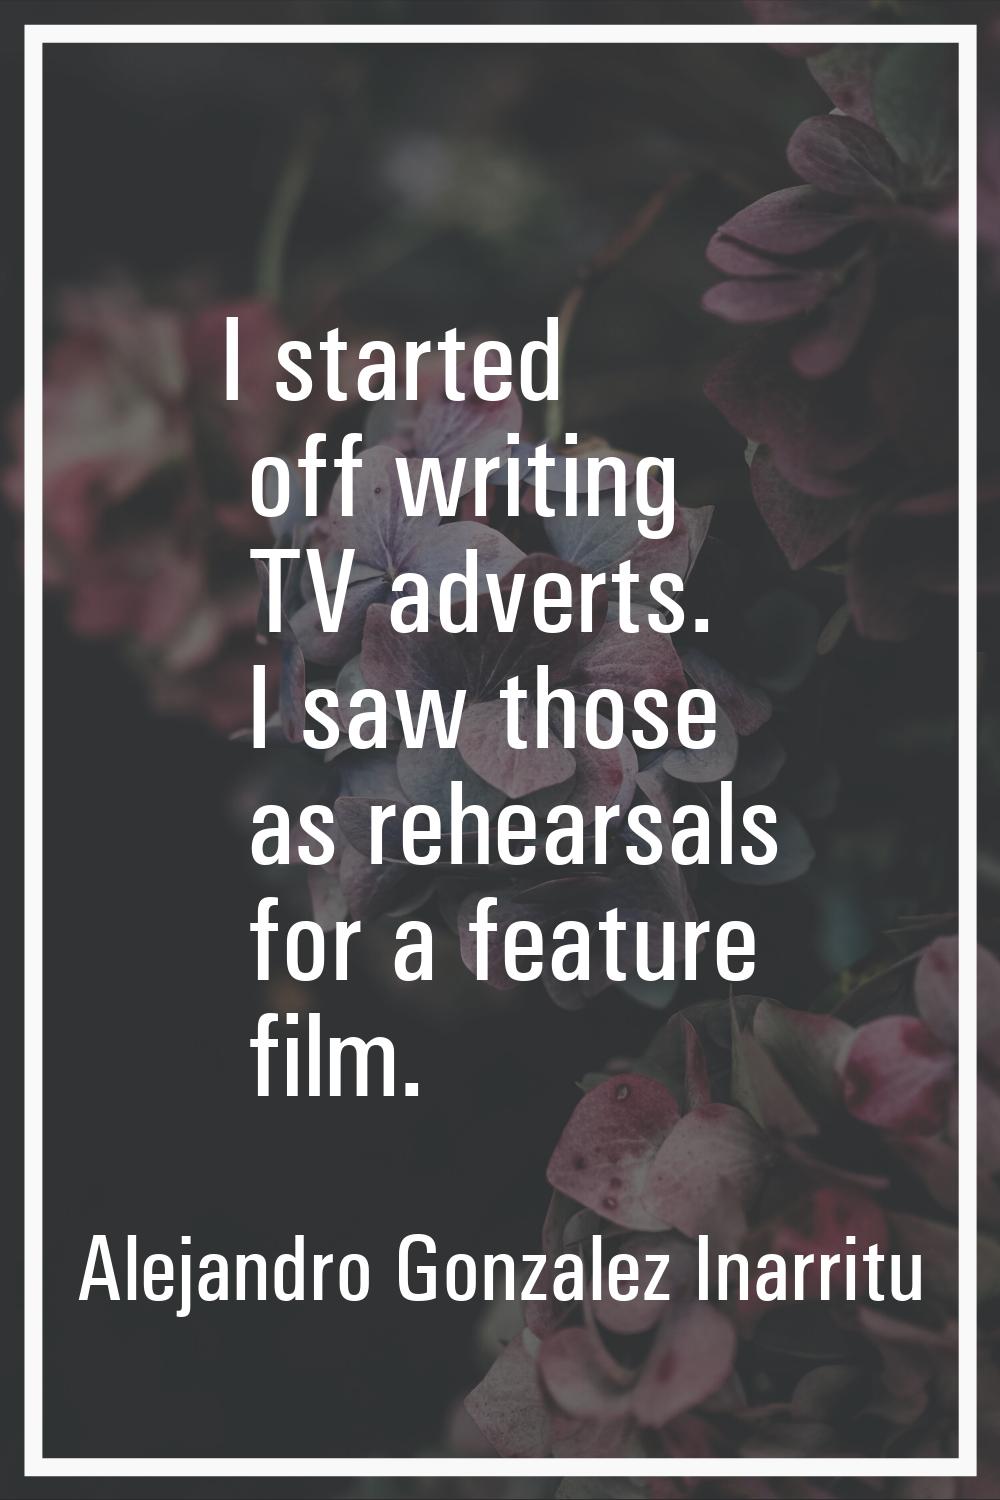 I started off writing TV adverts. I saw those as rehearsals for a feature film.